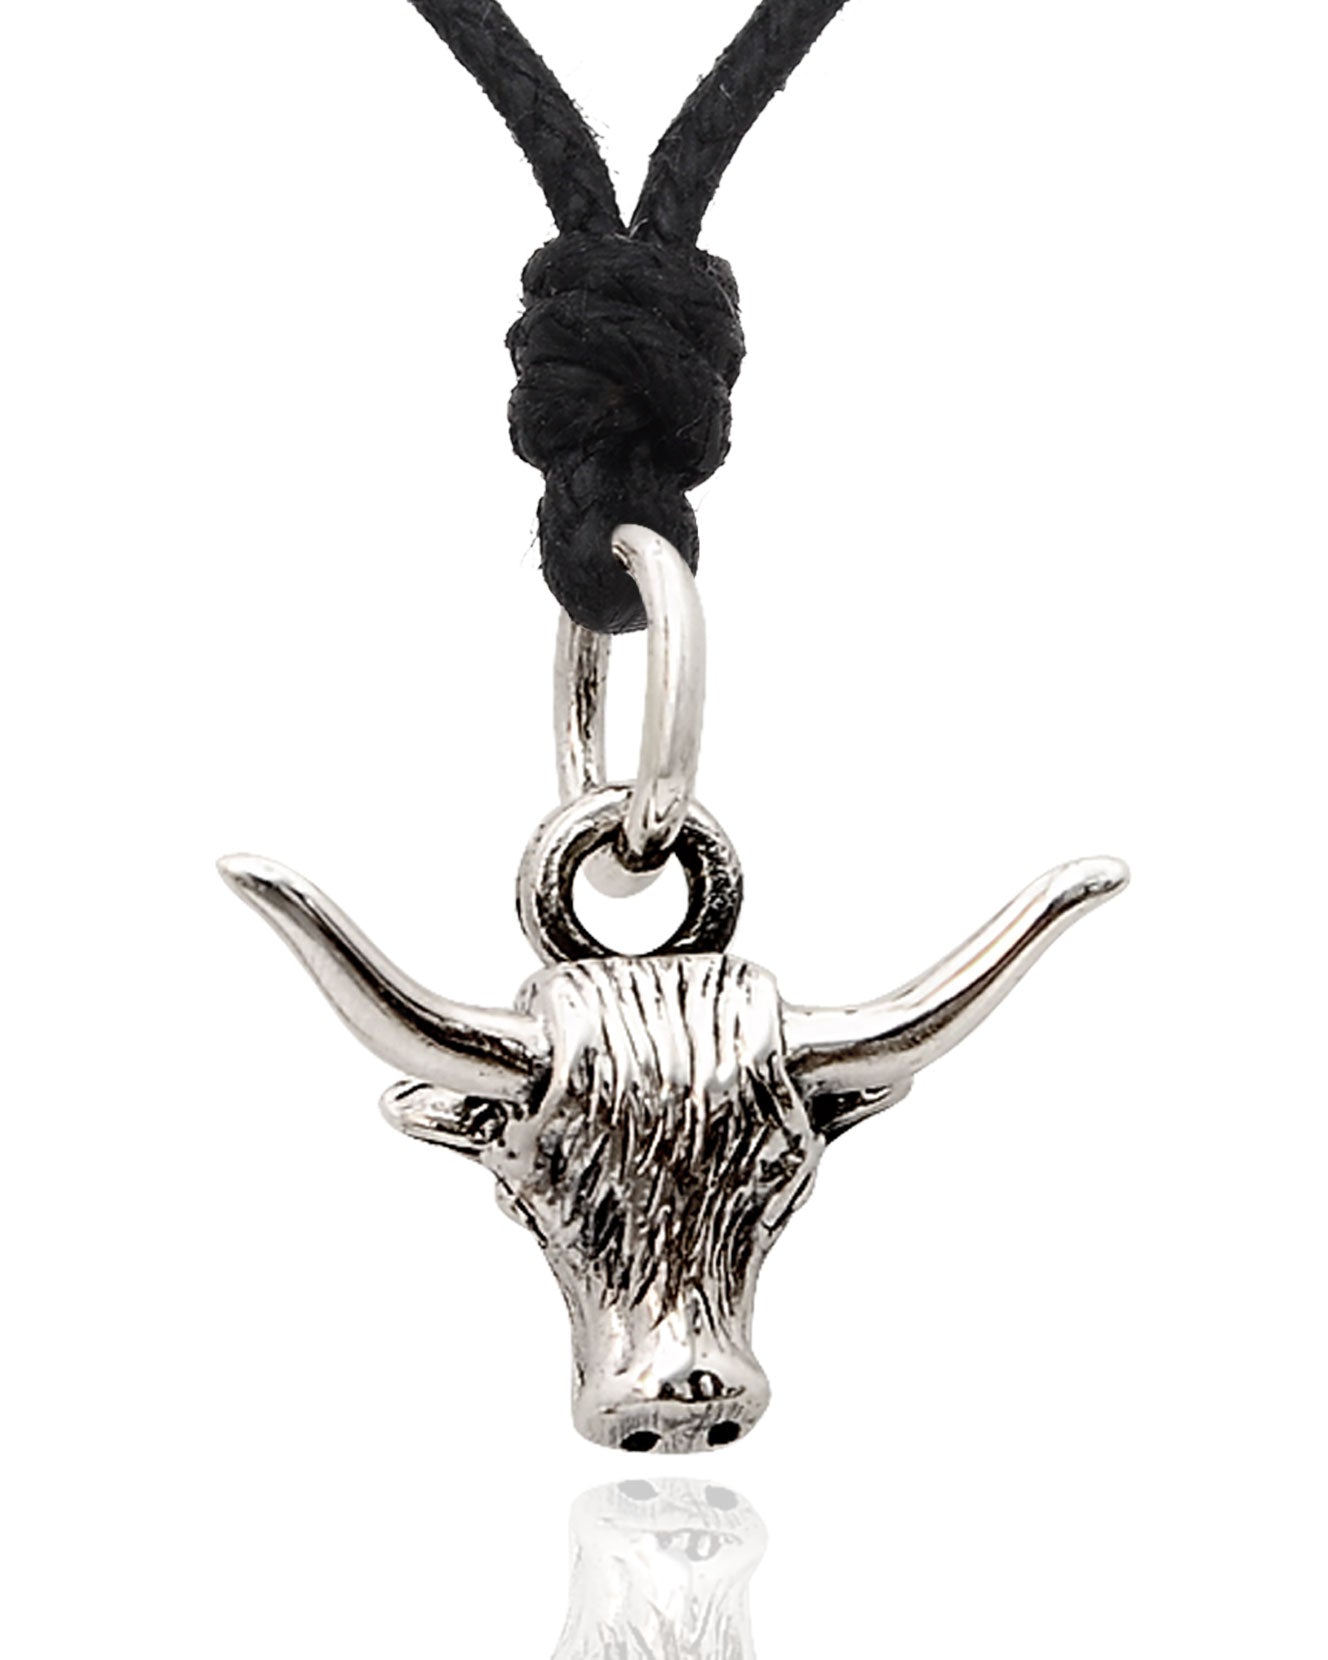 Texas Longhorn 92.5 Sterling Silver Pewter Brass Charm Necklace Pendant Jewelry